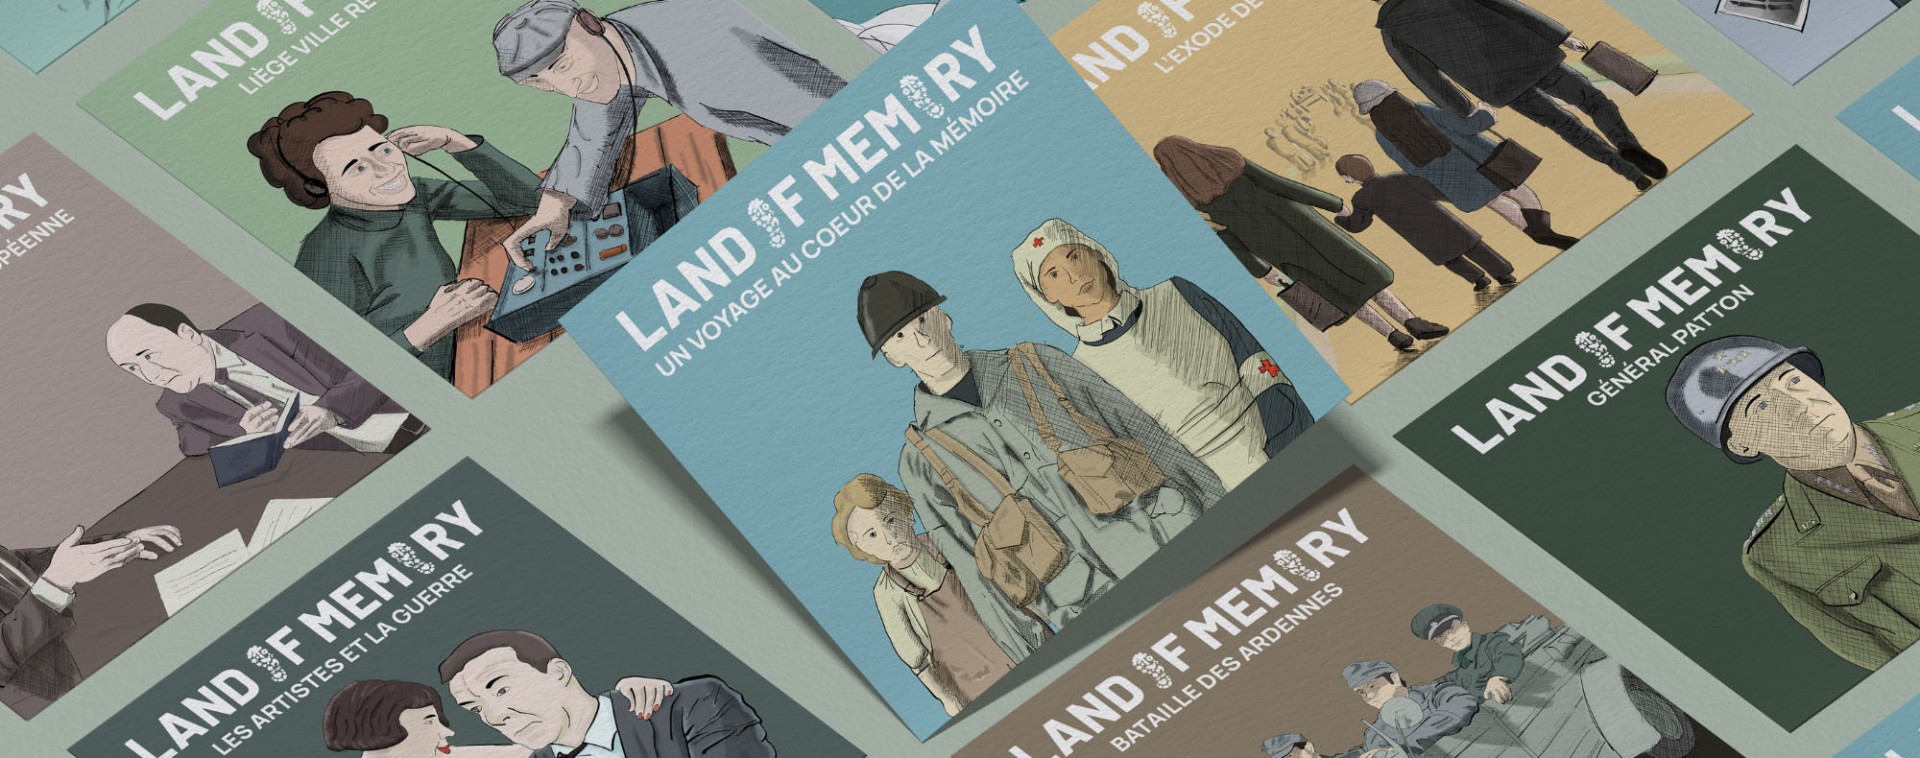 Land of Memory - A journey to the heart of memory | © Land of Memory